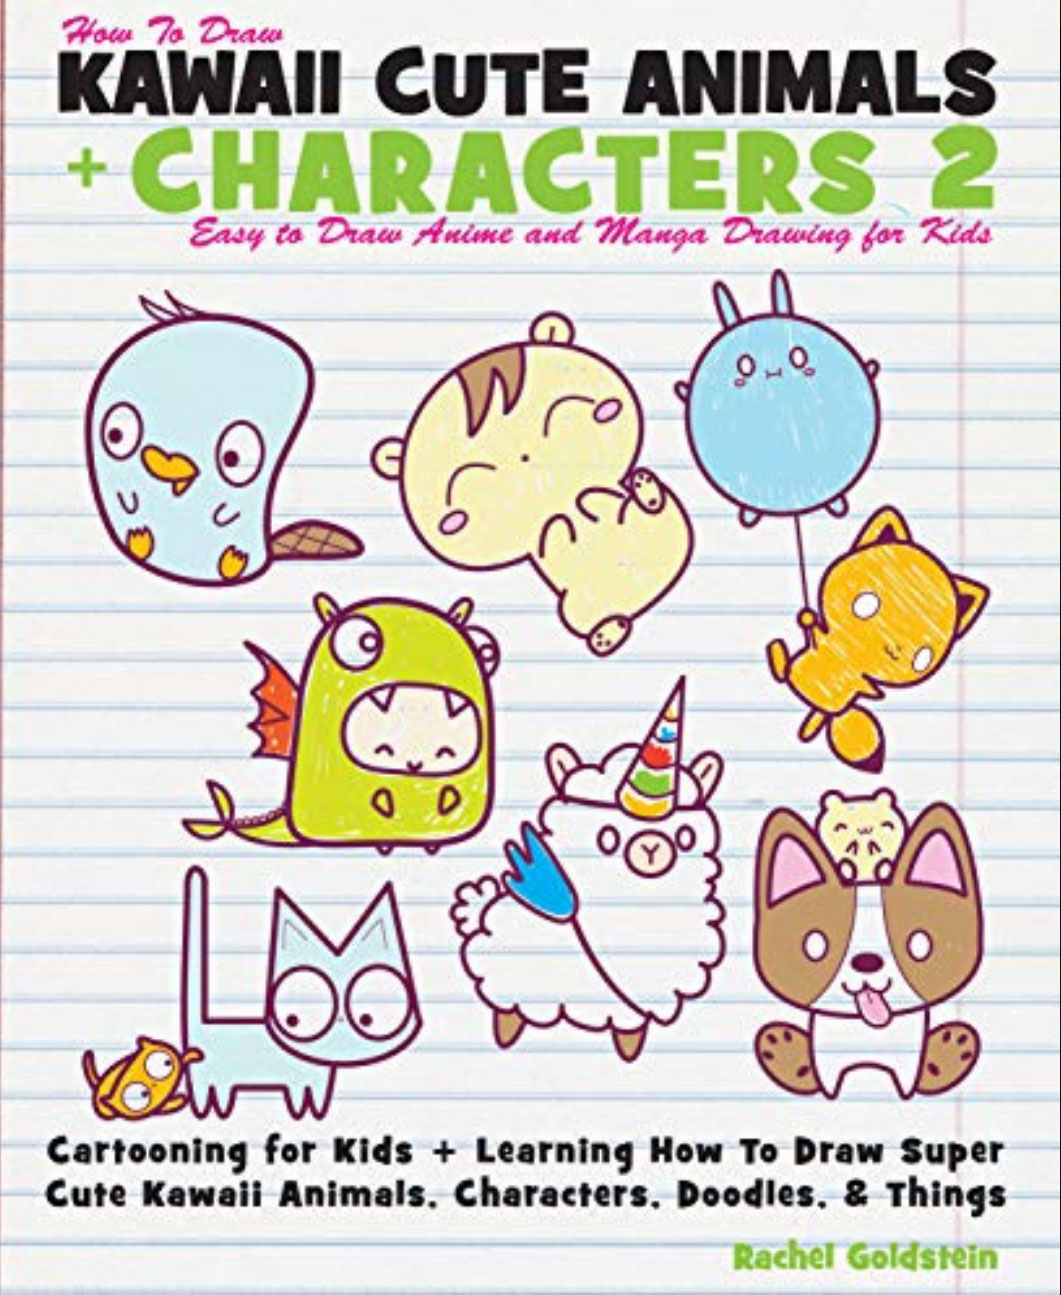 Drawing Kawaii Cute Animals, Characters, & Things 2 How to Draw Step